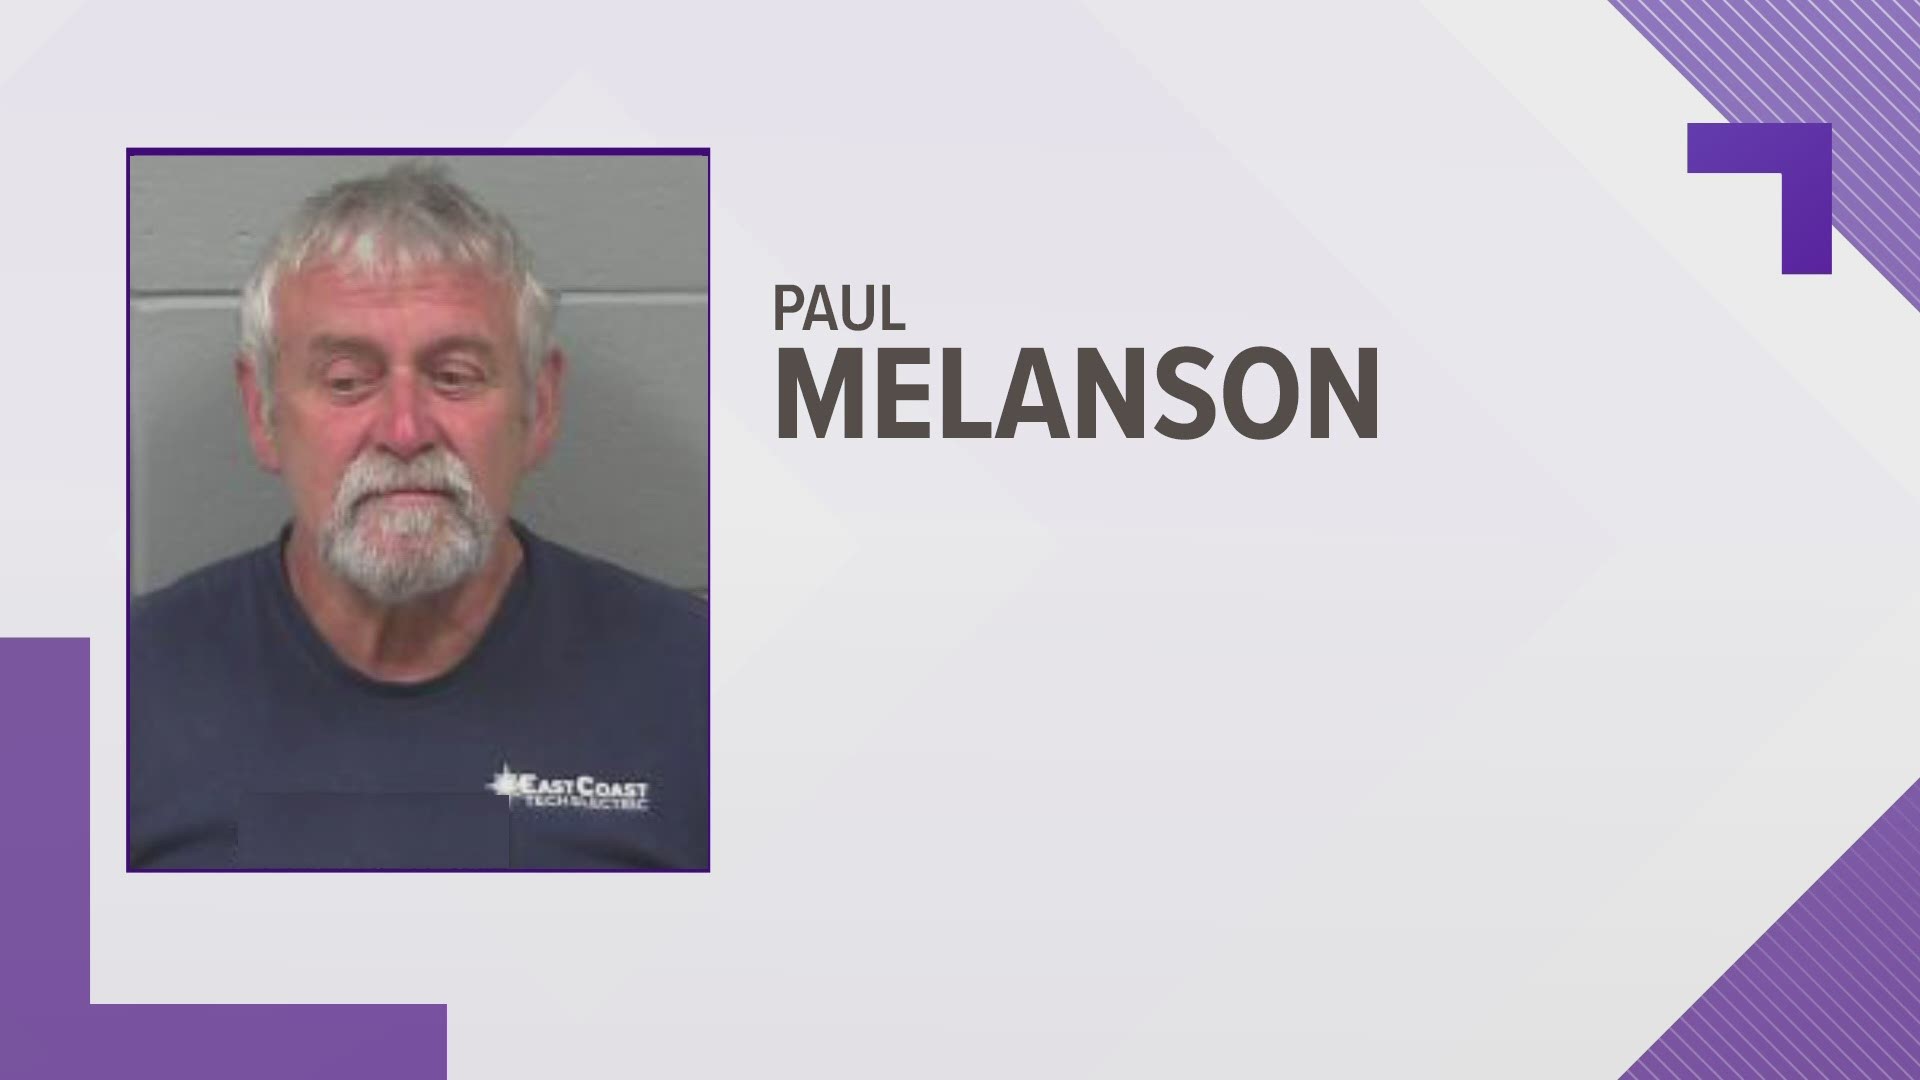 Police say Paul Melanson vandalized barriers in Bangor that were painted with the pride flag.